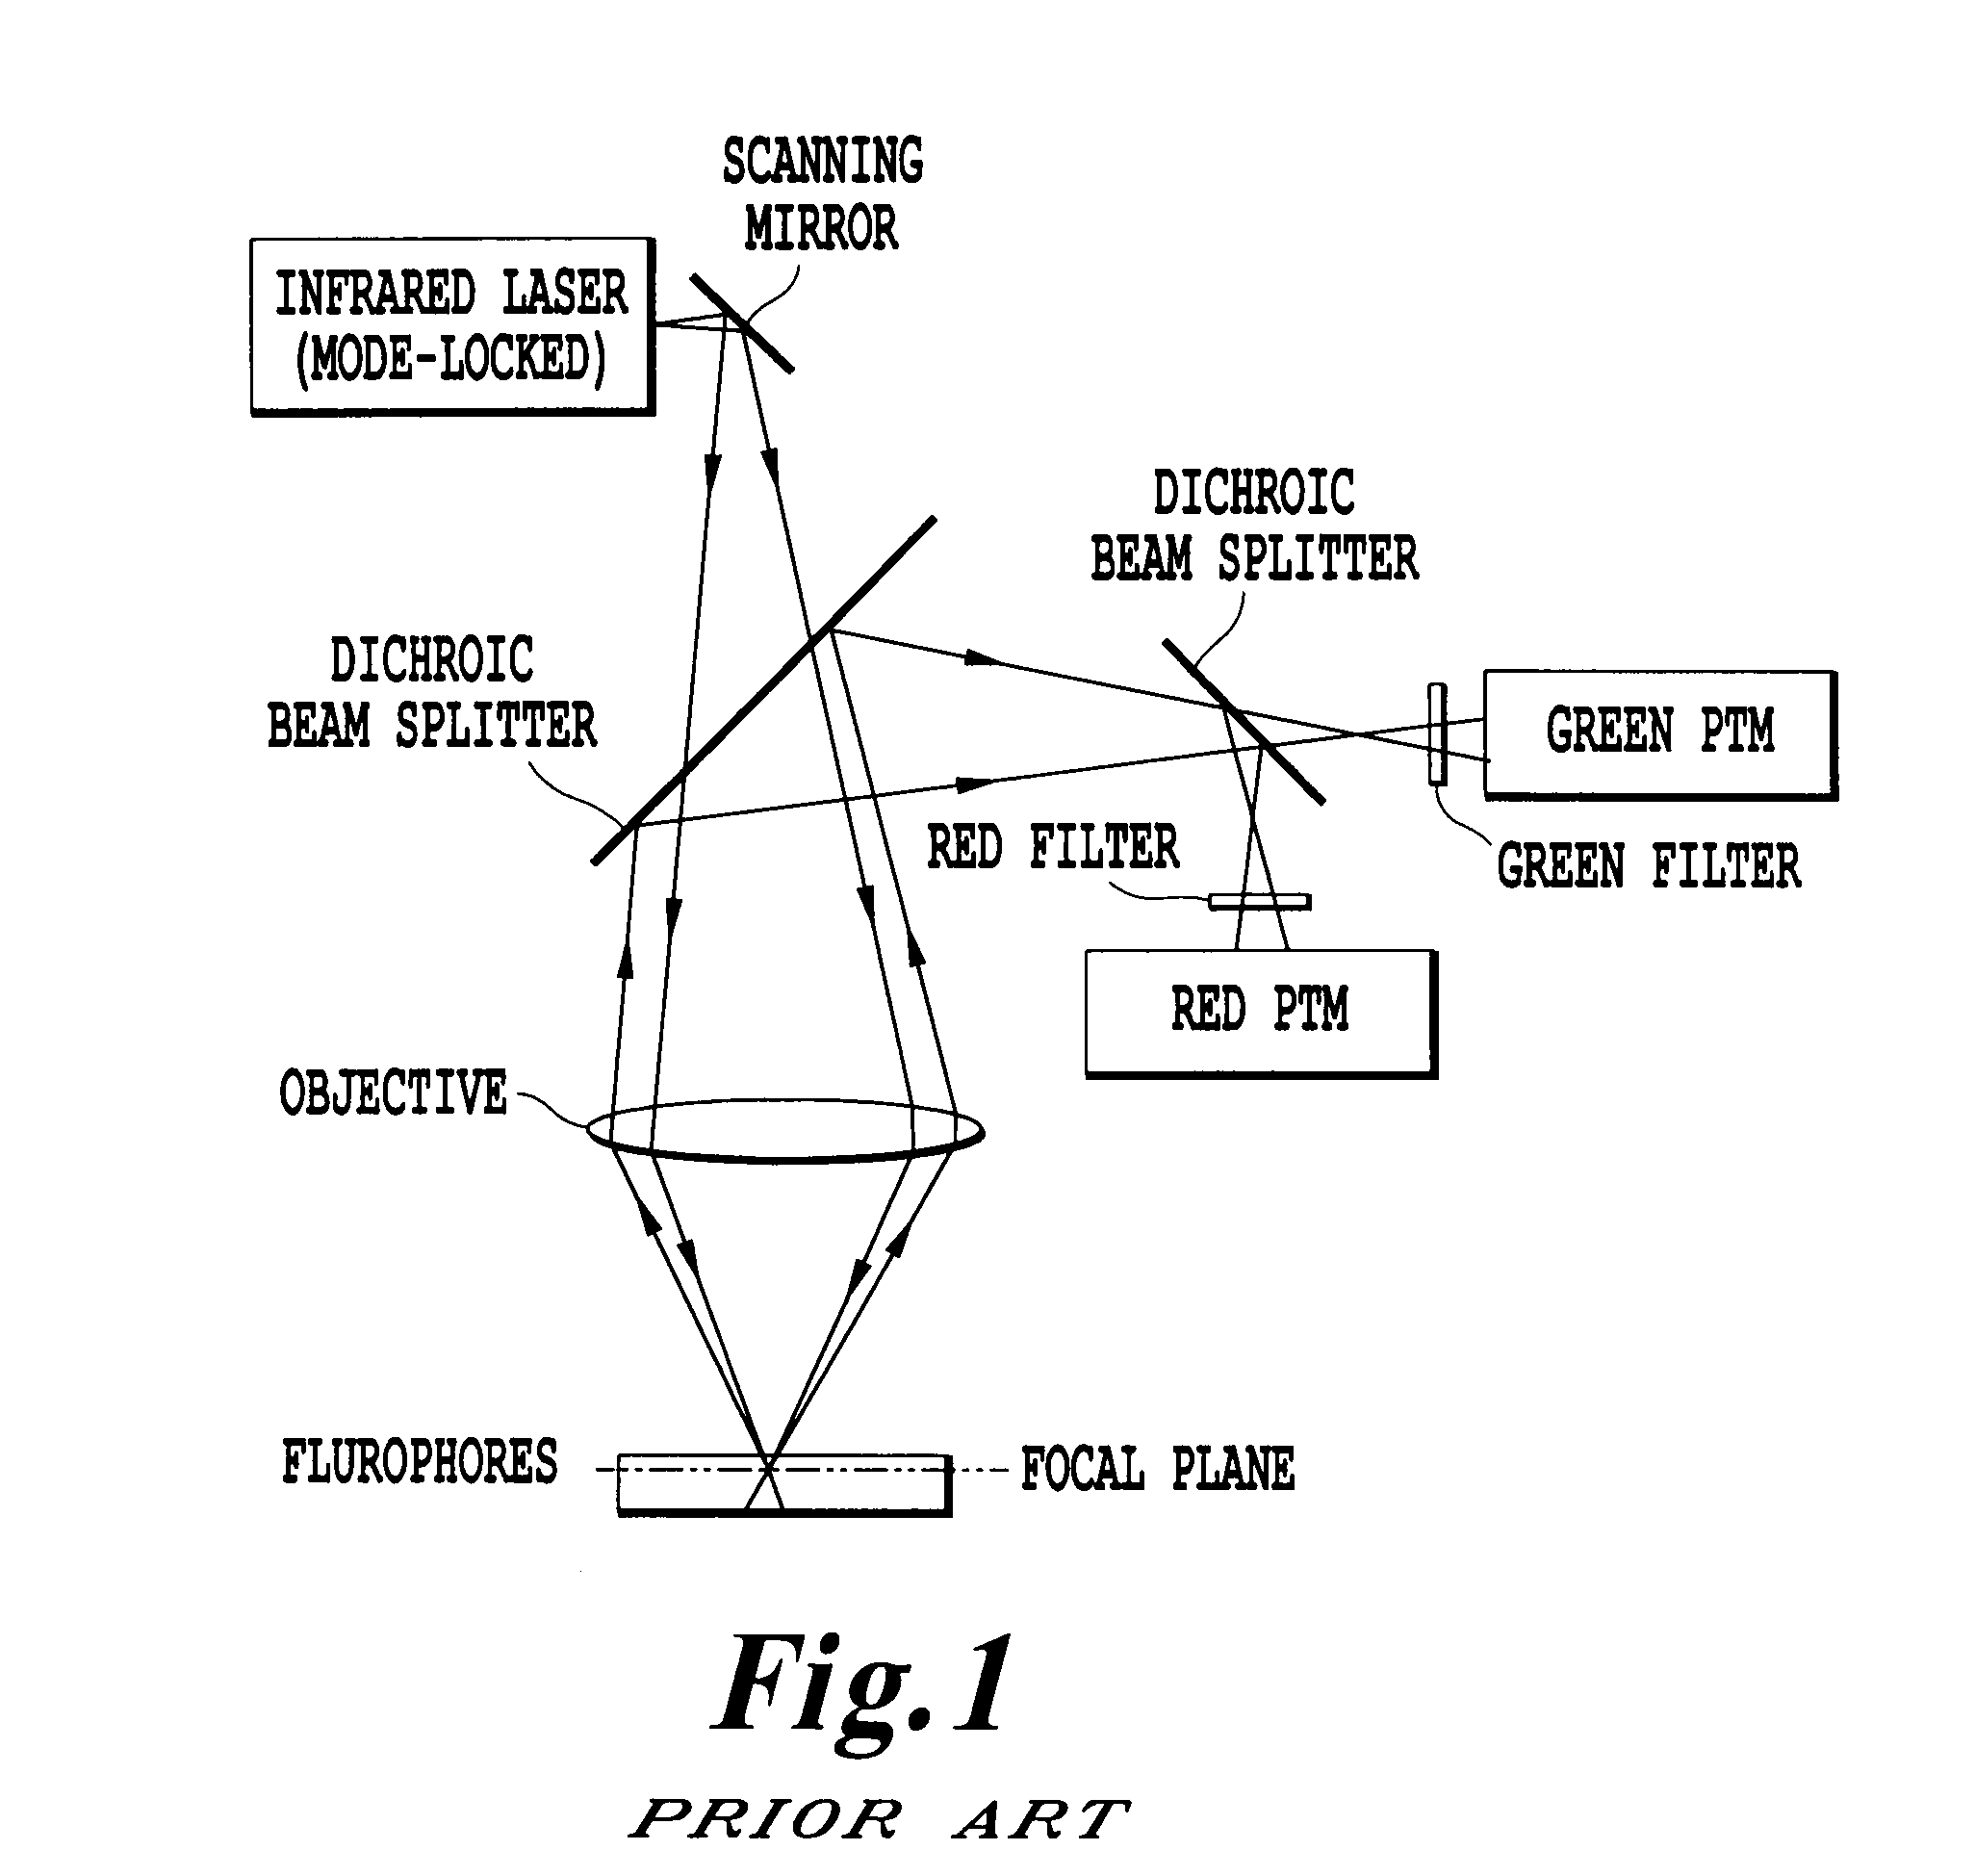 Methods and systems for treating cell proliferation disorders using two-photon simultaneous absorption